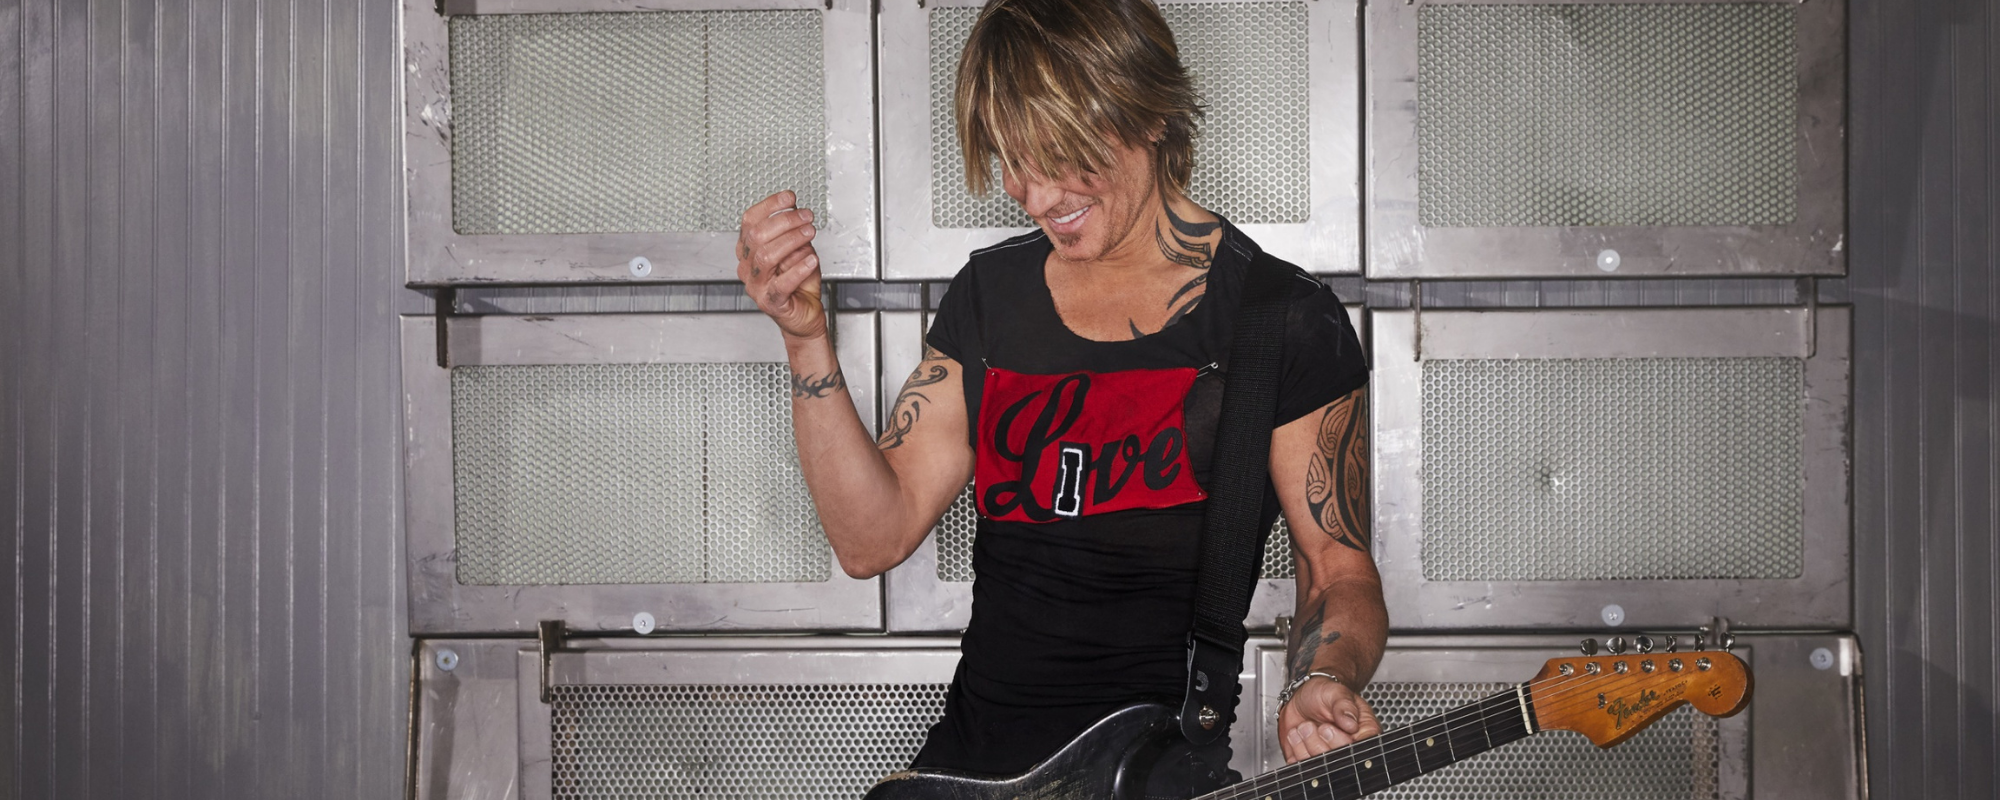 Keith Urban’s New Song “Crimson Blue” Will Feature On Season Finale of His Wife’s Hulu Series ‘Nine Perfect Strangers’